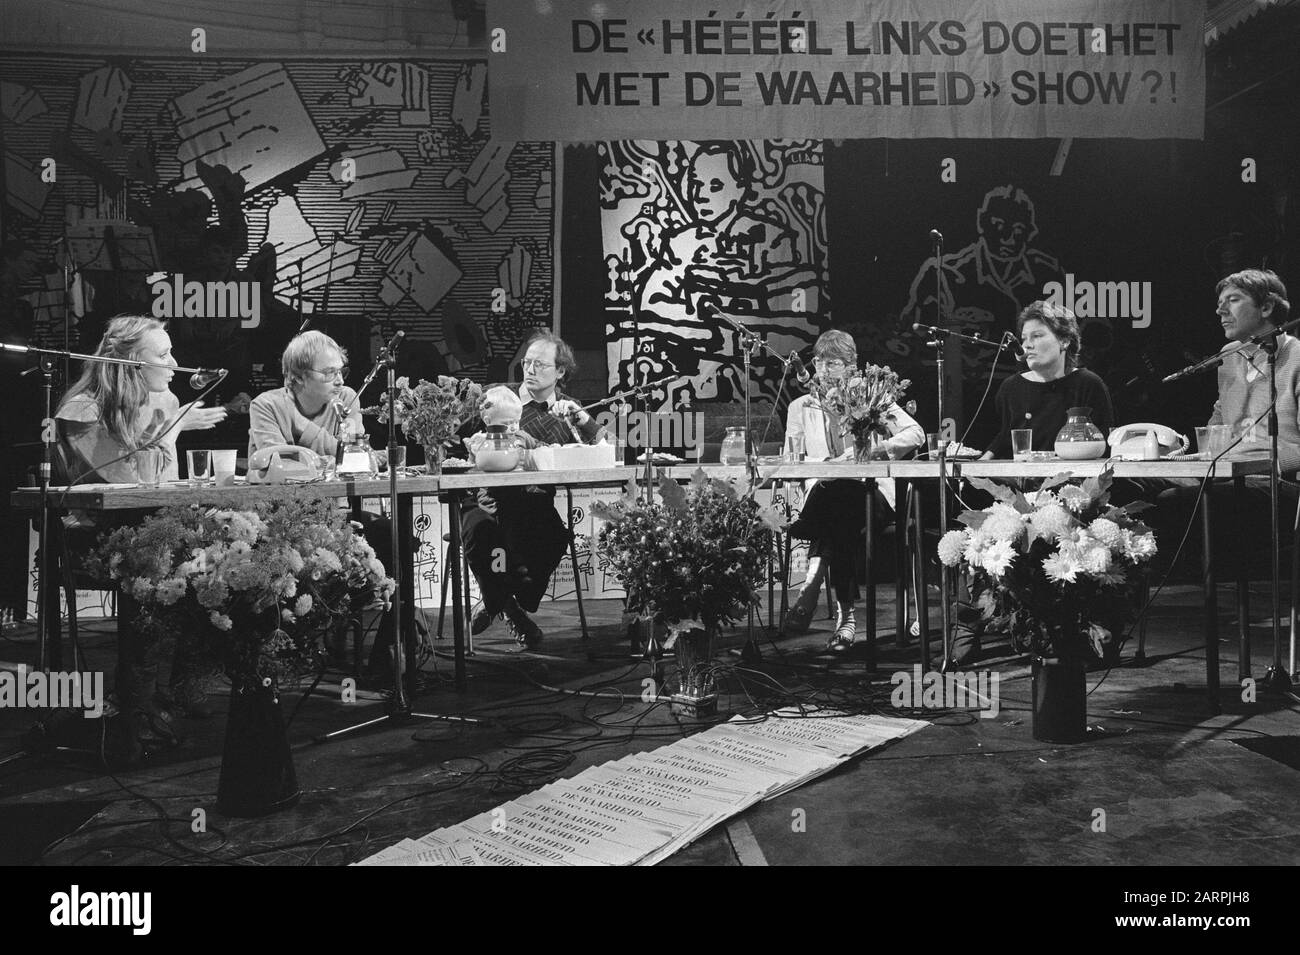 Very left does it with the Truth show?! in Paradiso Amsterda  V.l.n.r. Unknown, unknown, mr. Walter Etty, mrs. Evelien Eshuis (CPN), mw. Andrée van Es (PSP) and Mr. Peter Lankhordt (PPR) during a forum discussion on Truth. In the foreground a pile with the newspaper The Truth Date: 8 October 1983 Location: Amsterdam, Noord-Holland Keywords: communism, conferences, newspapers Personal name: Es, Andrée van, Eshuis, Eveline, Etty, Walter, Lankhorst, Peter Institutionname: Paradiso Stock Photo